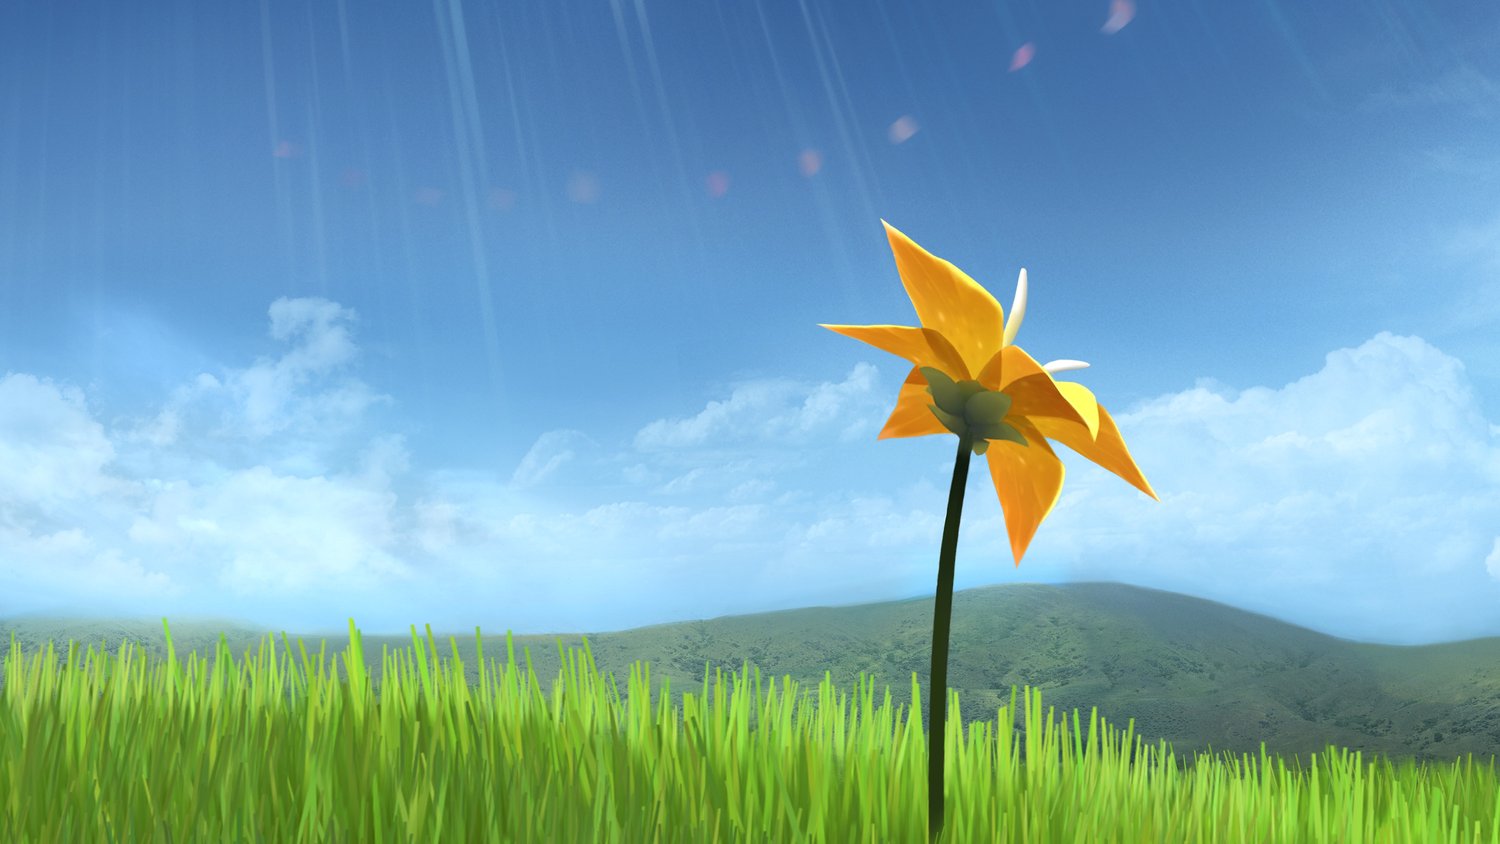 A digital rendering of a yellow flower in a grassy field with hills and clouds in the background